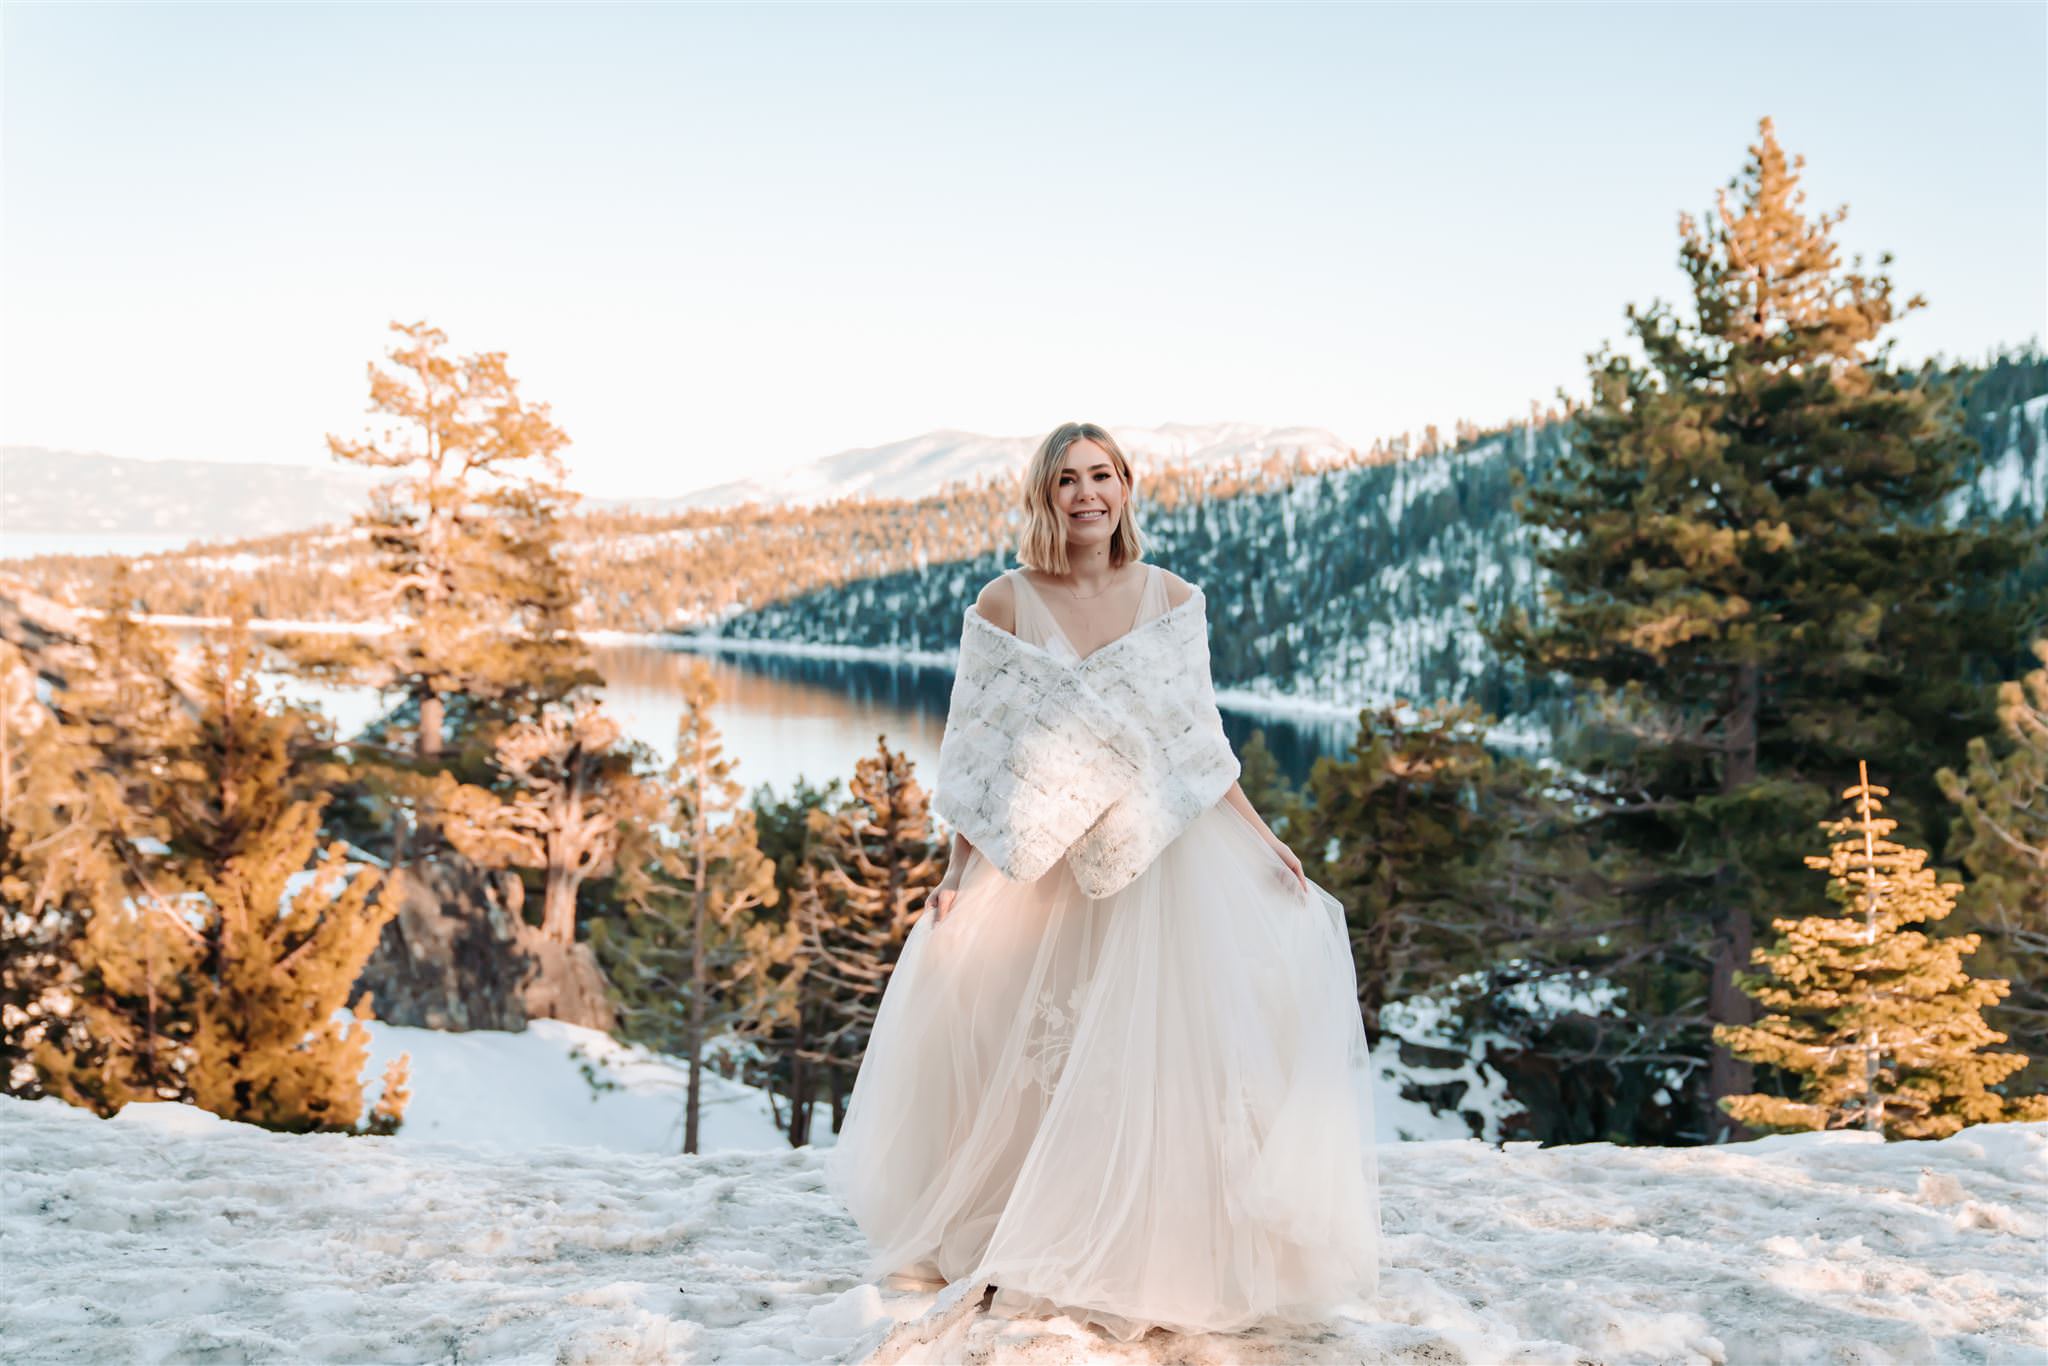 A bride standing in snow overlooking Emerald Bay for her wedding day